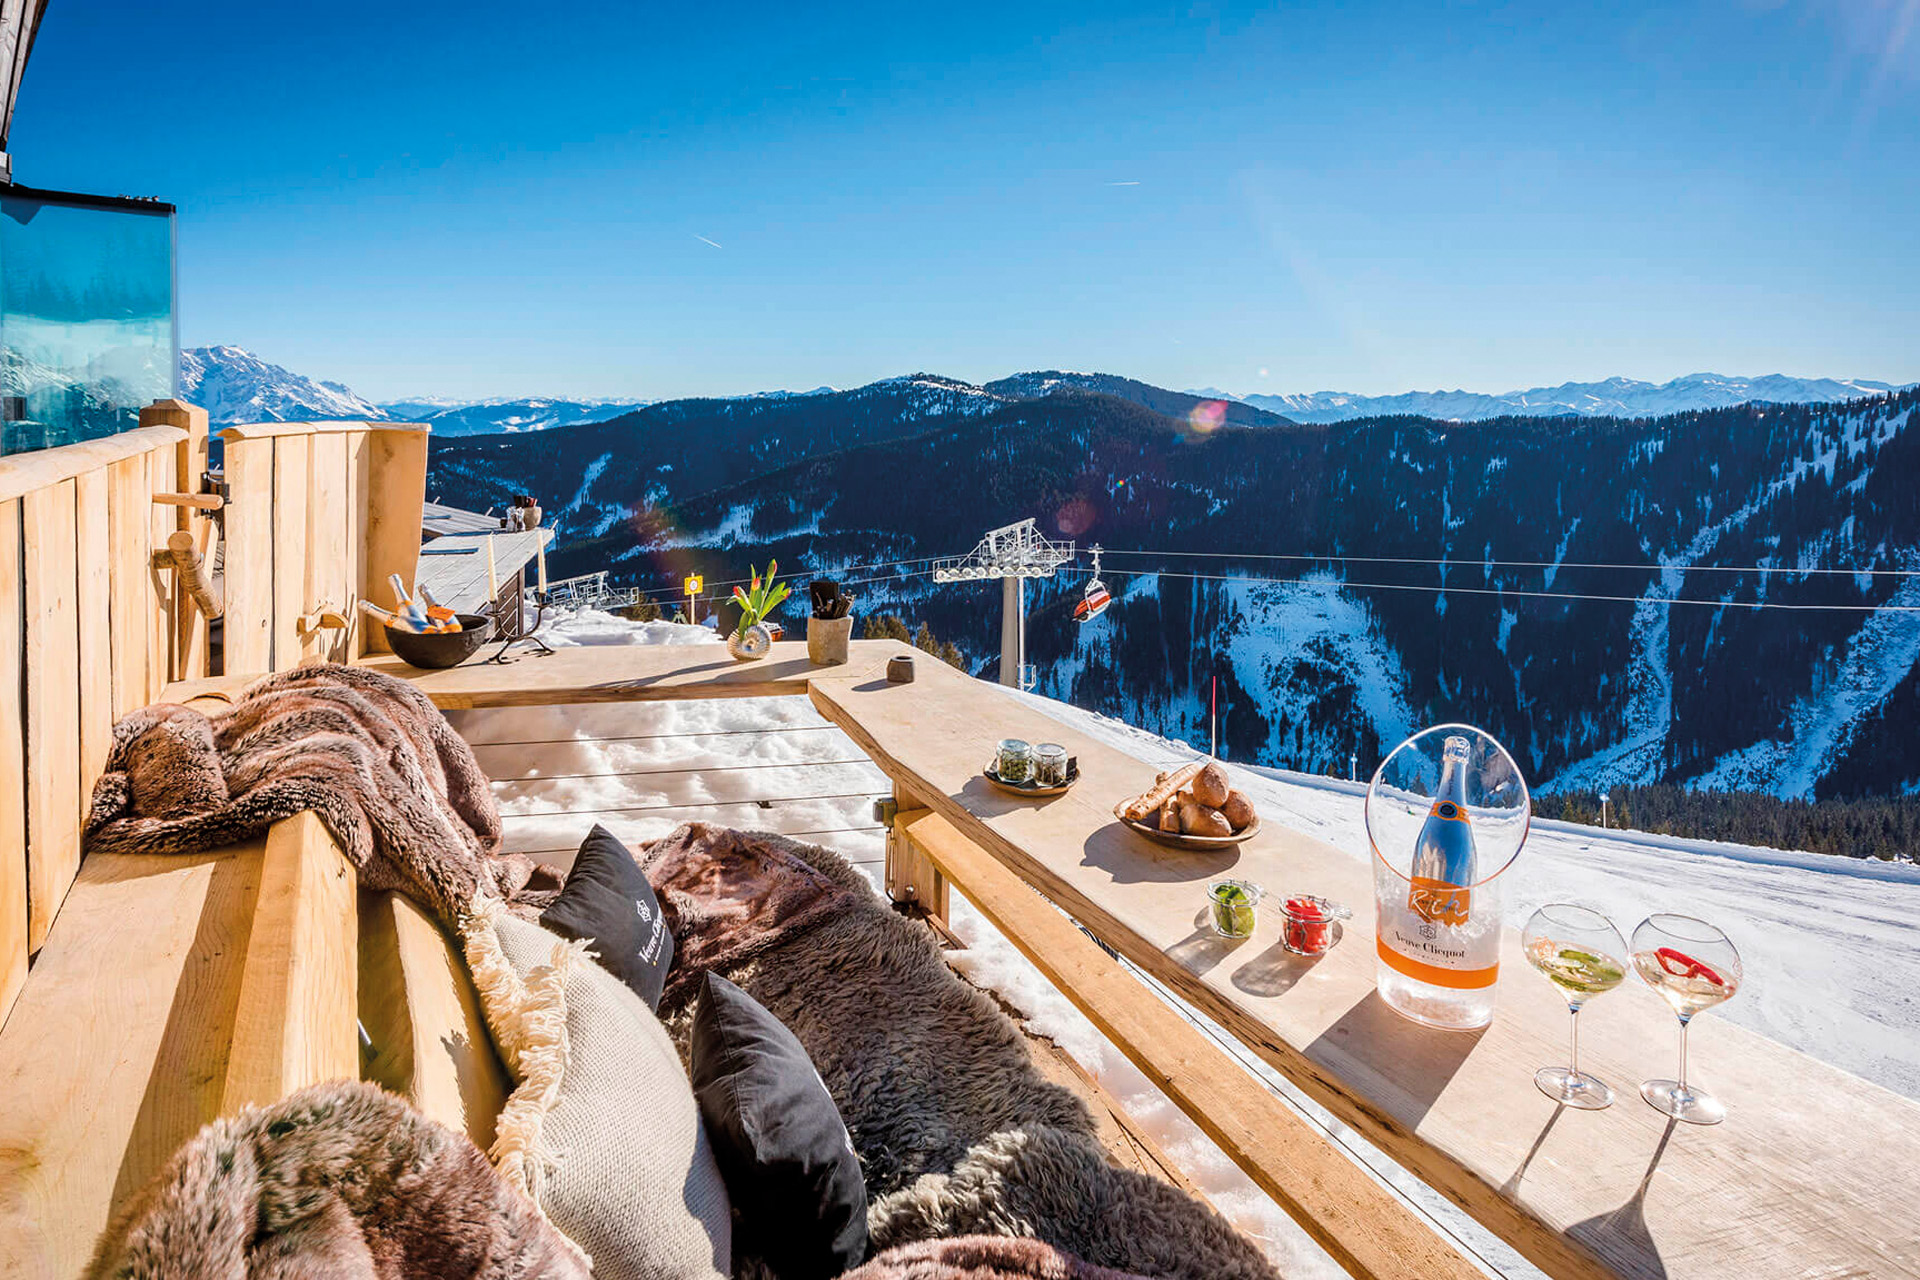 food and drinks overlooking the mountains